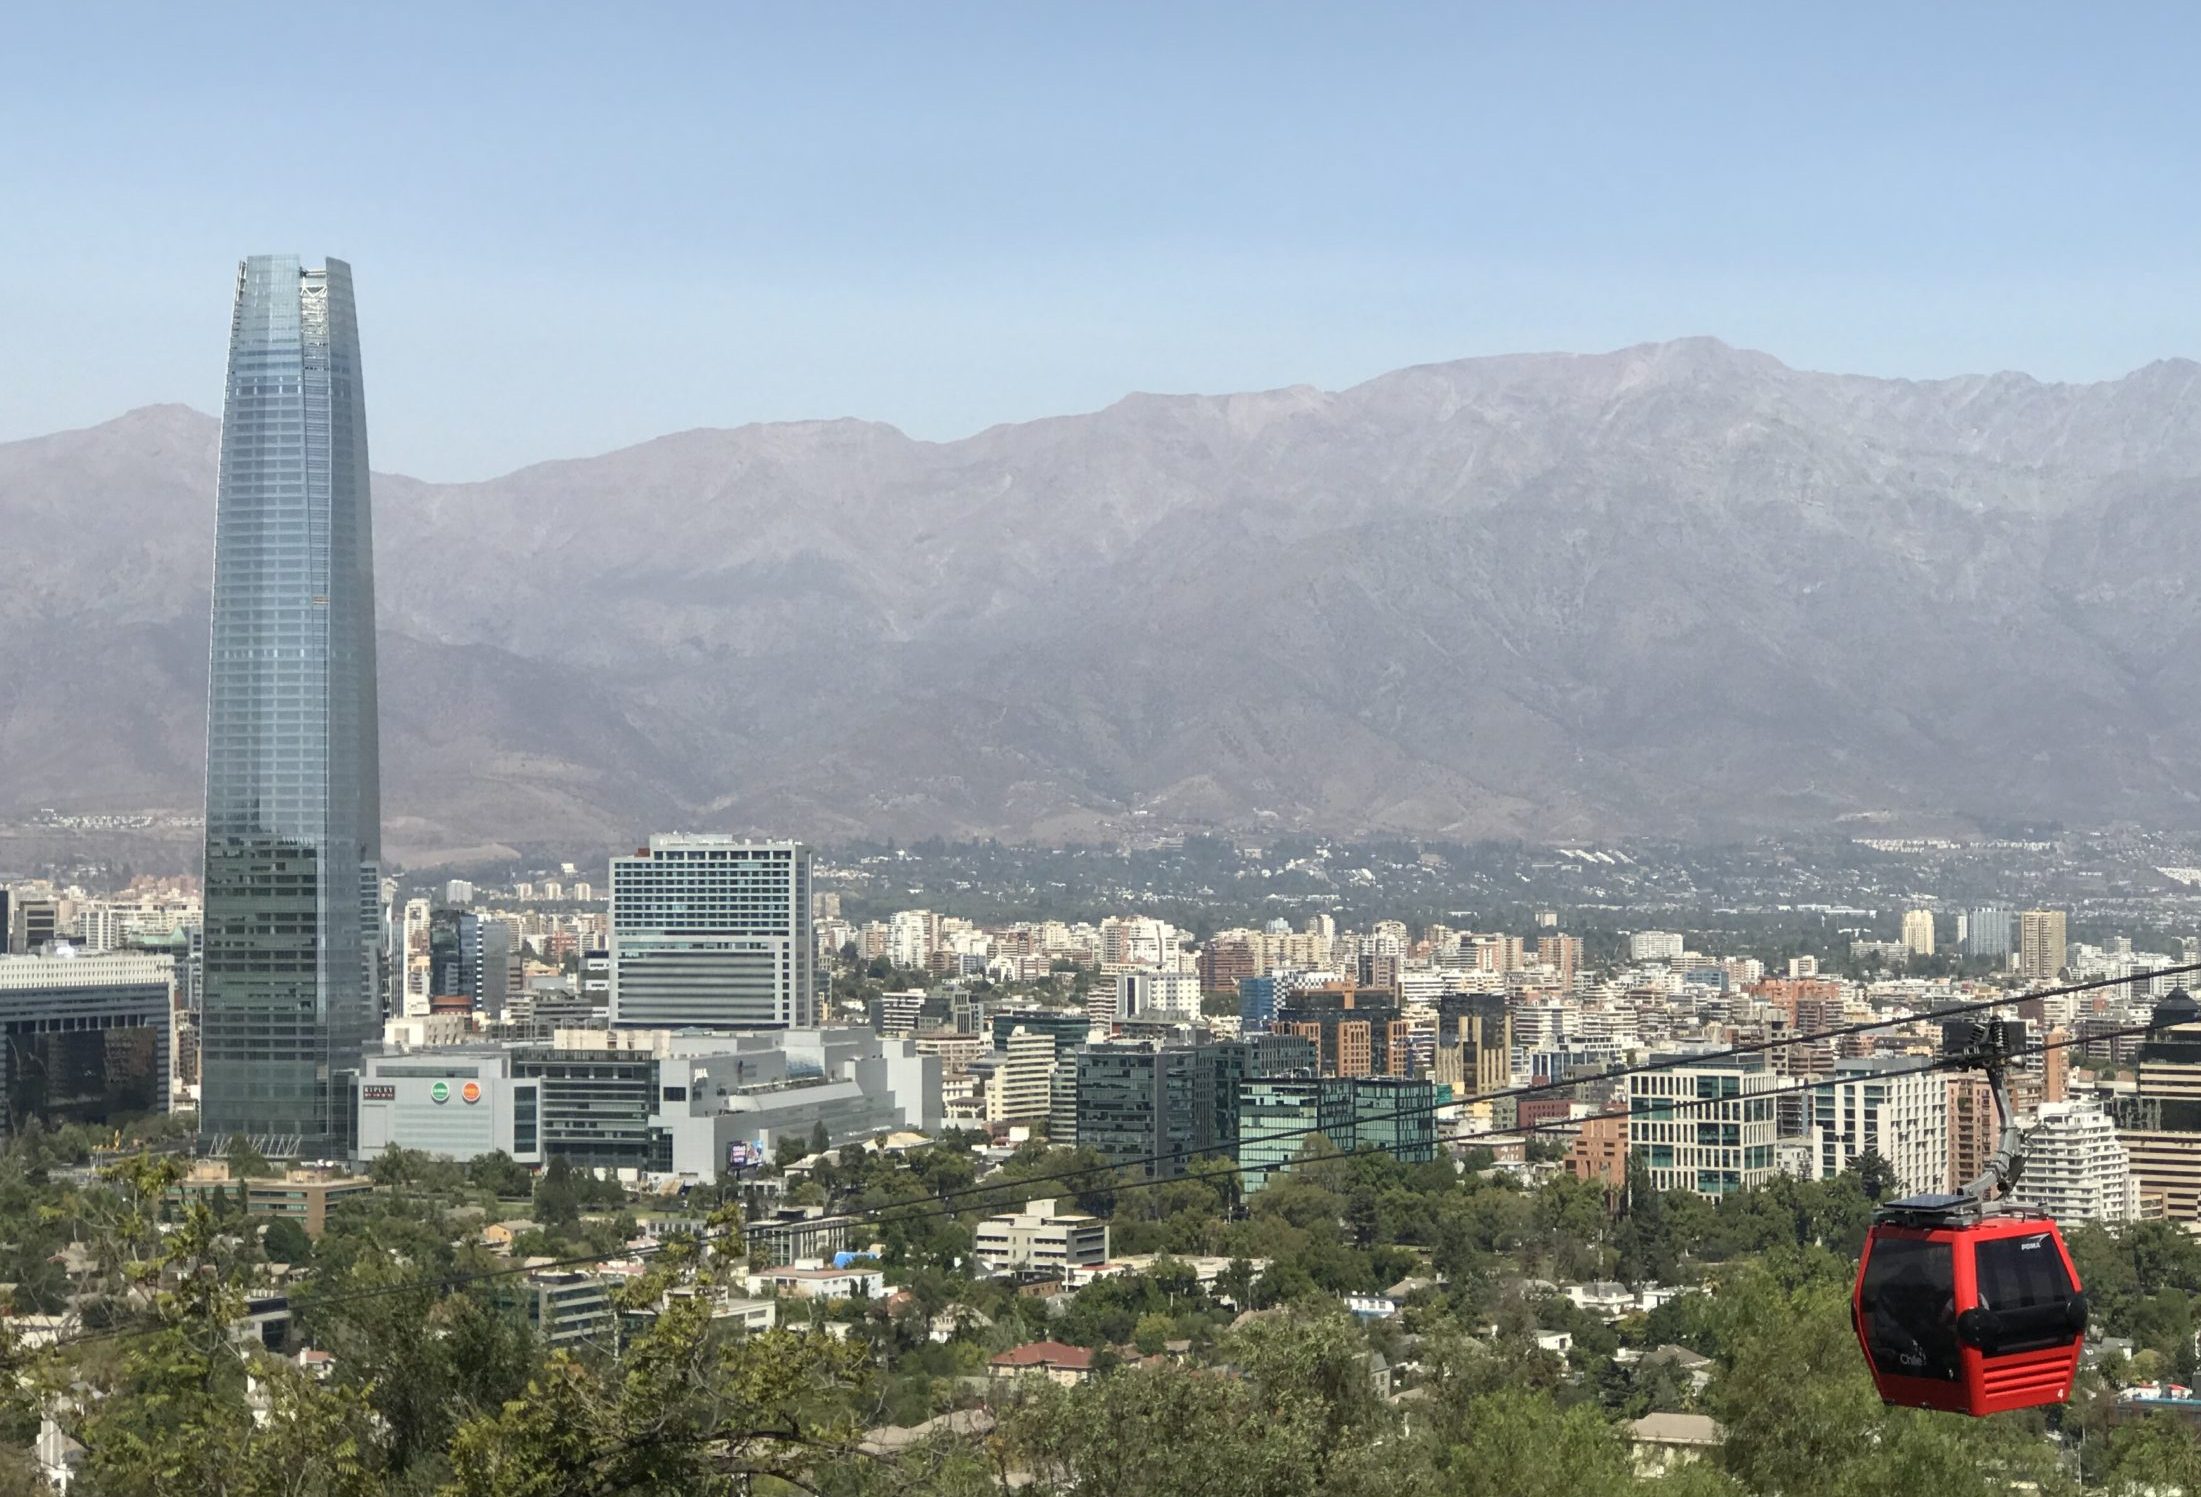 Chile skyline including Costanera Center and the Andes mountain range